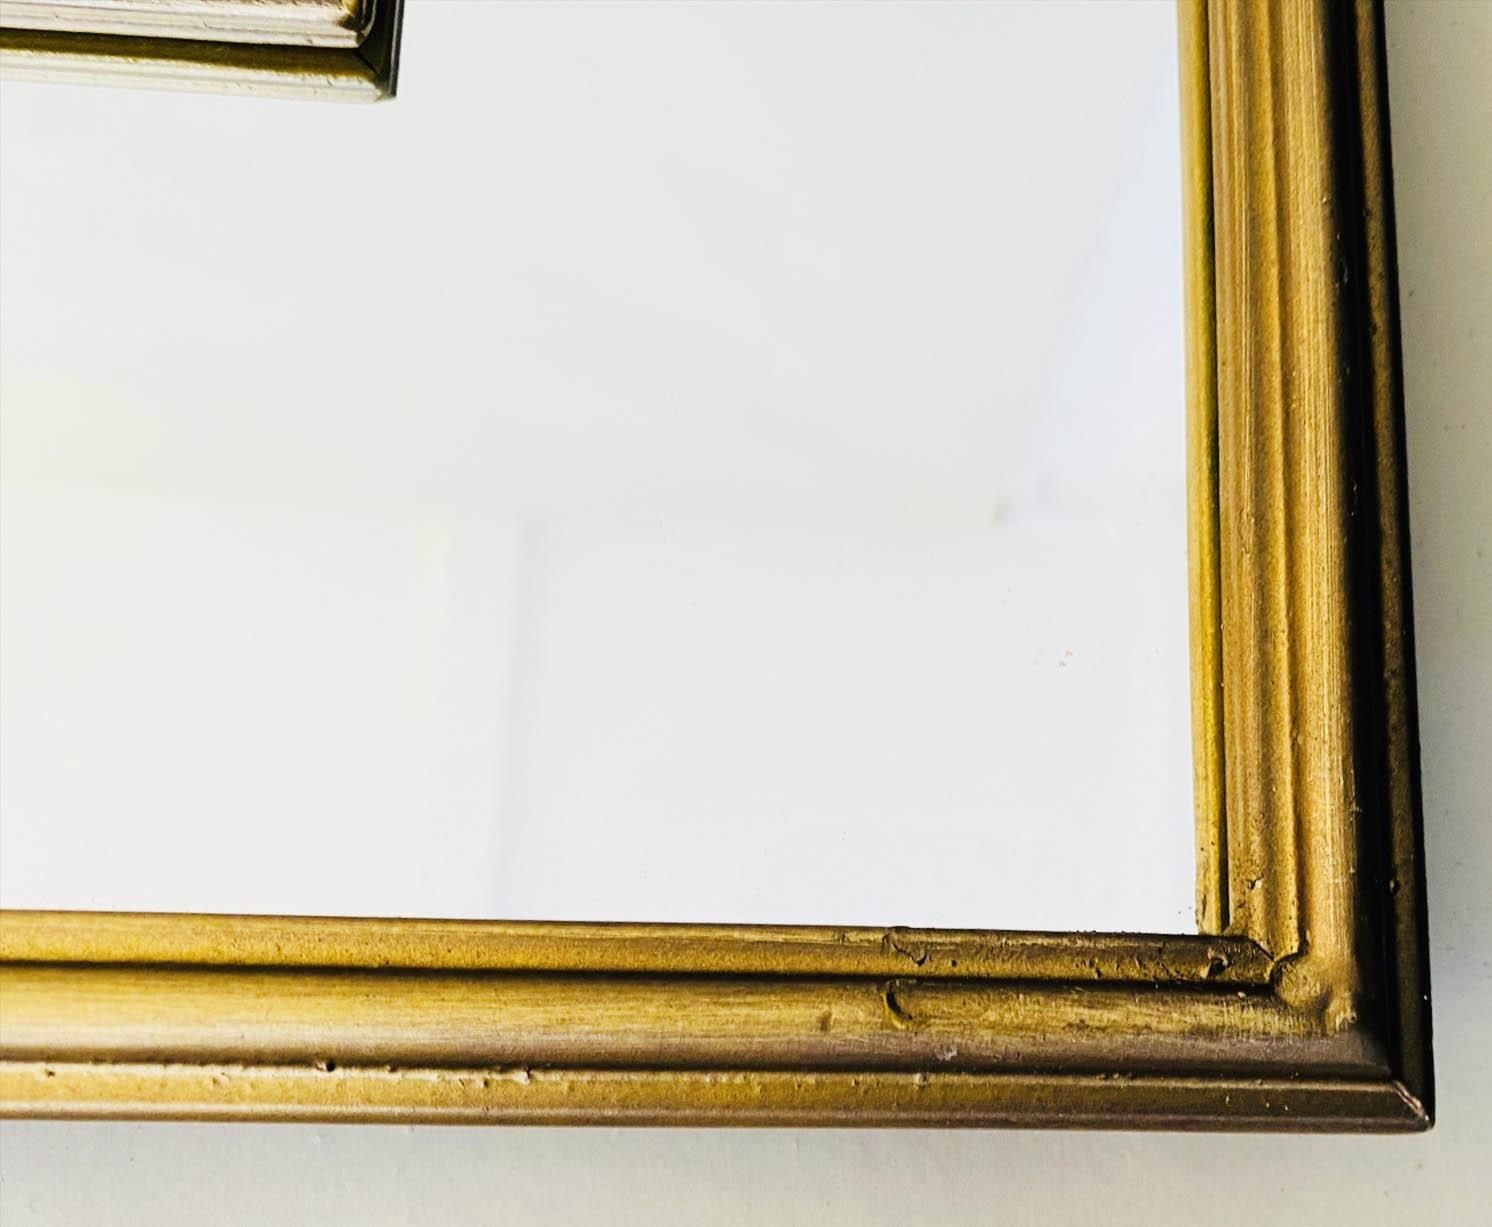 ARCHITECTURAL HALL MIRROR, Regency style, arched gilt metal frame, 180cm x 63cm. - Image 3 of 3